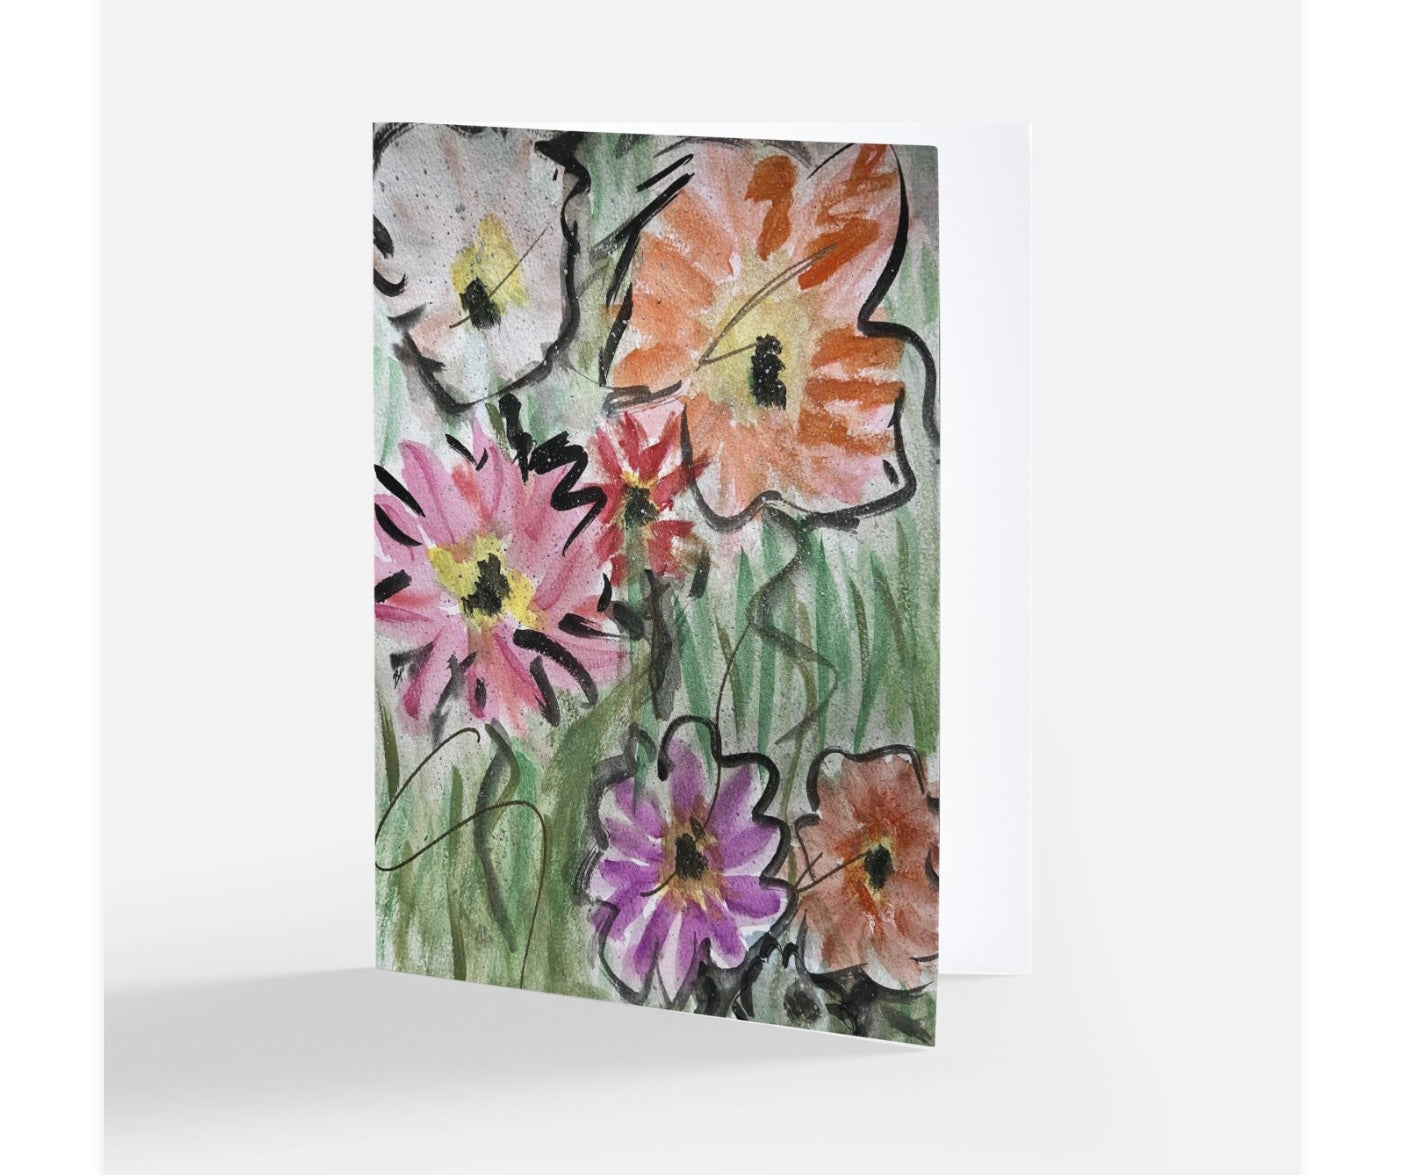 The 'Flower Power' Greeting Card  "PEACE"